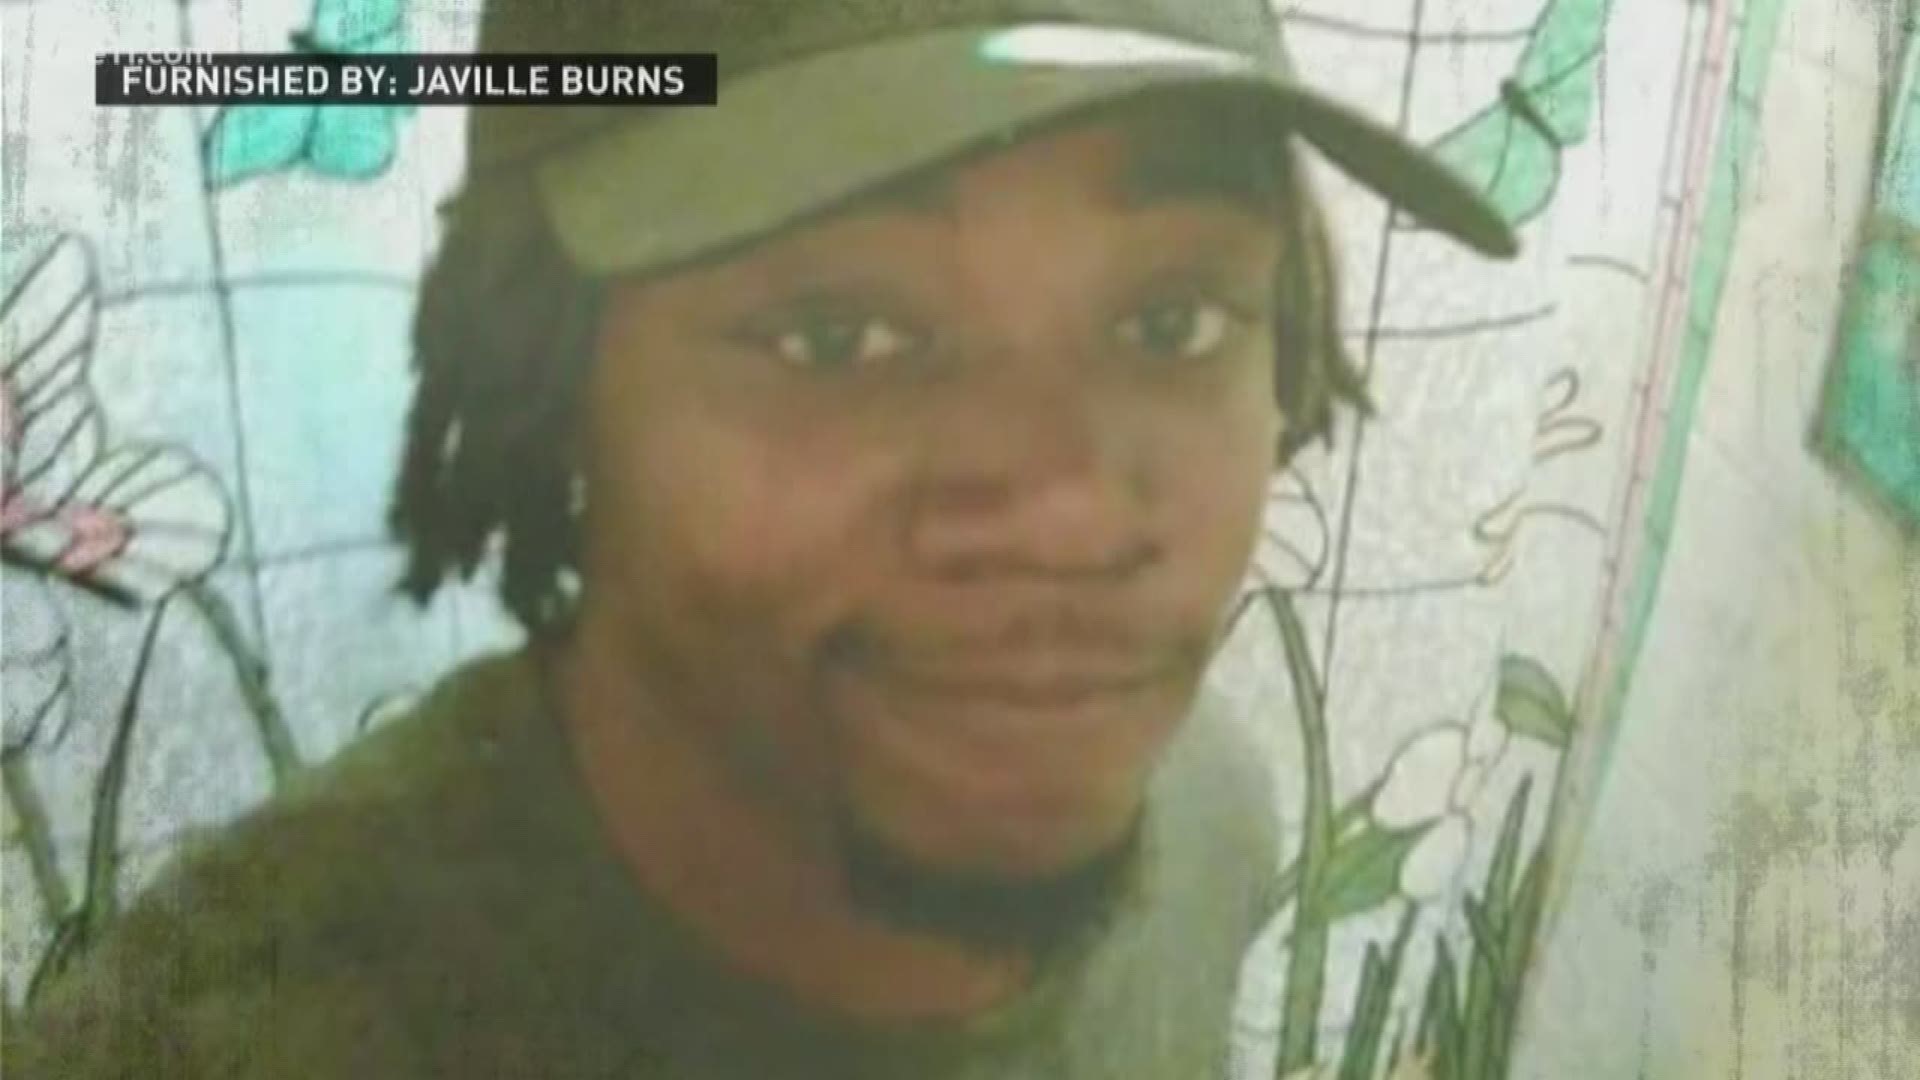 The family of Jamar Clark, who was fatally shot by Minneapolis police in 2015, has accepted a tentative $200,000 settlement with the City of Minneapolis.